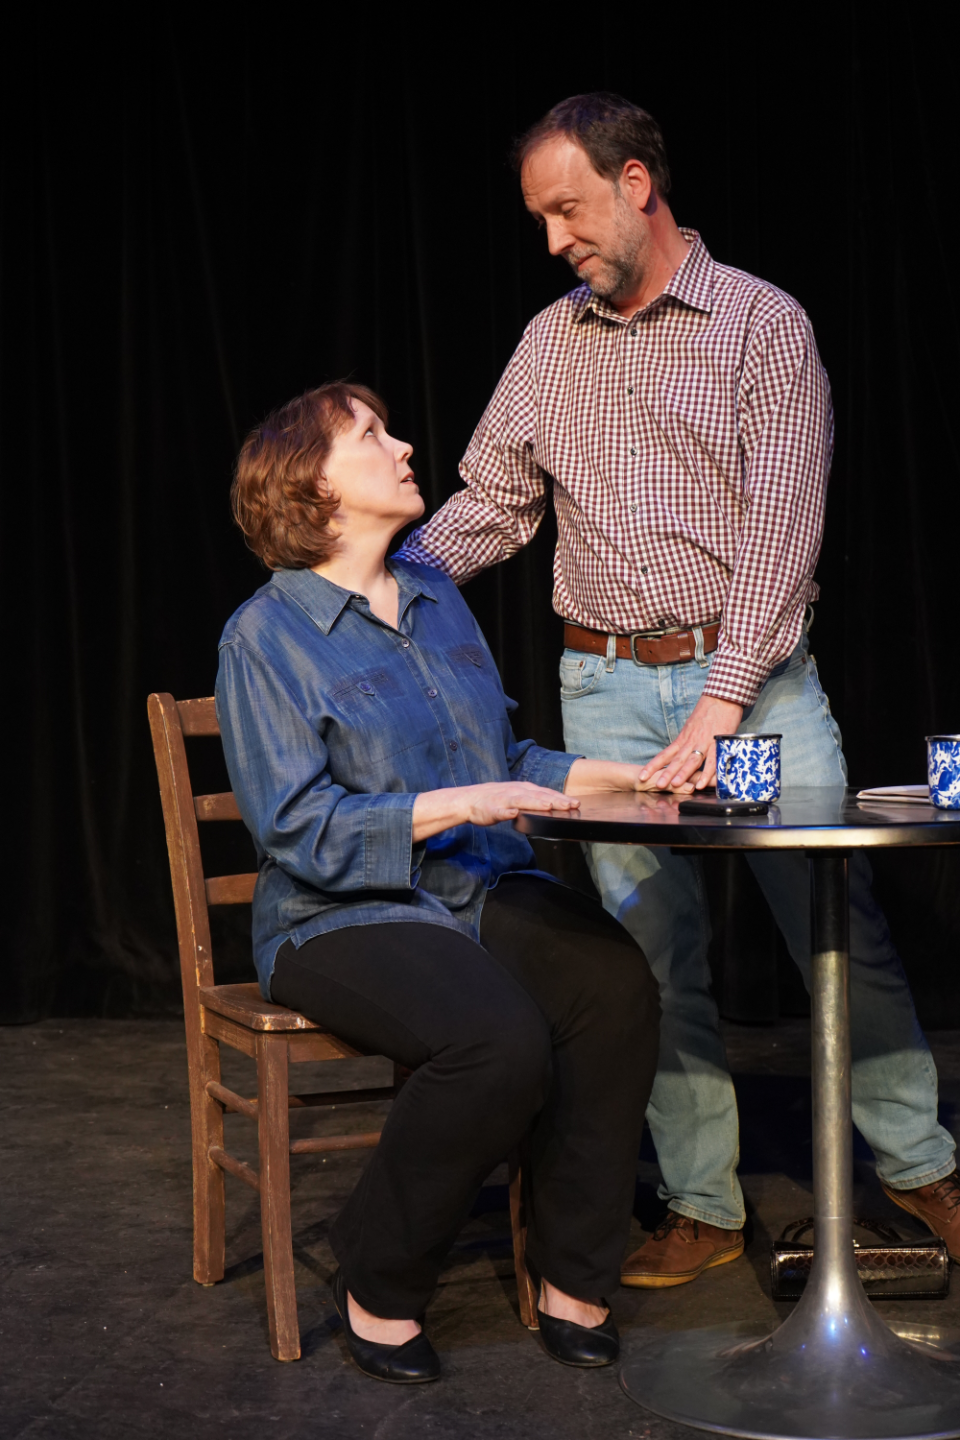 Sarah Merkey as Anna, with Casey Merkey as Ralph in "Response Button' by Paula Cizmar, part of the MadLab Theatre production of "Theatre Roulette 2022."